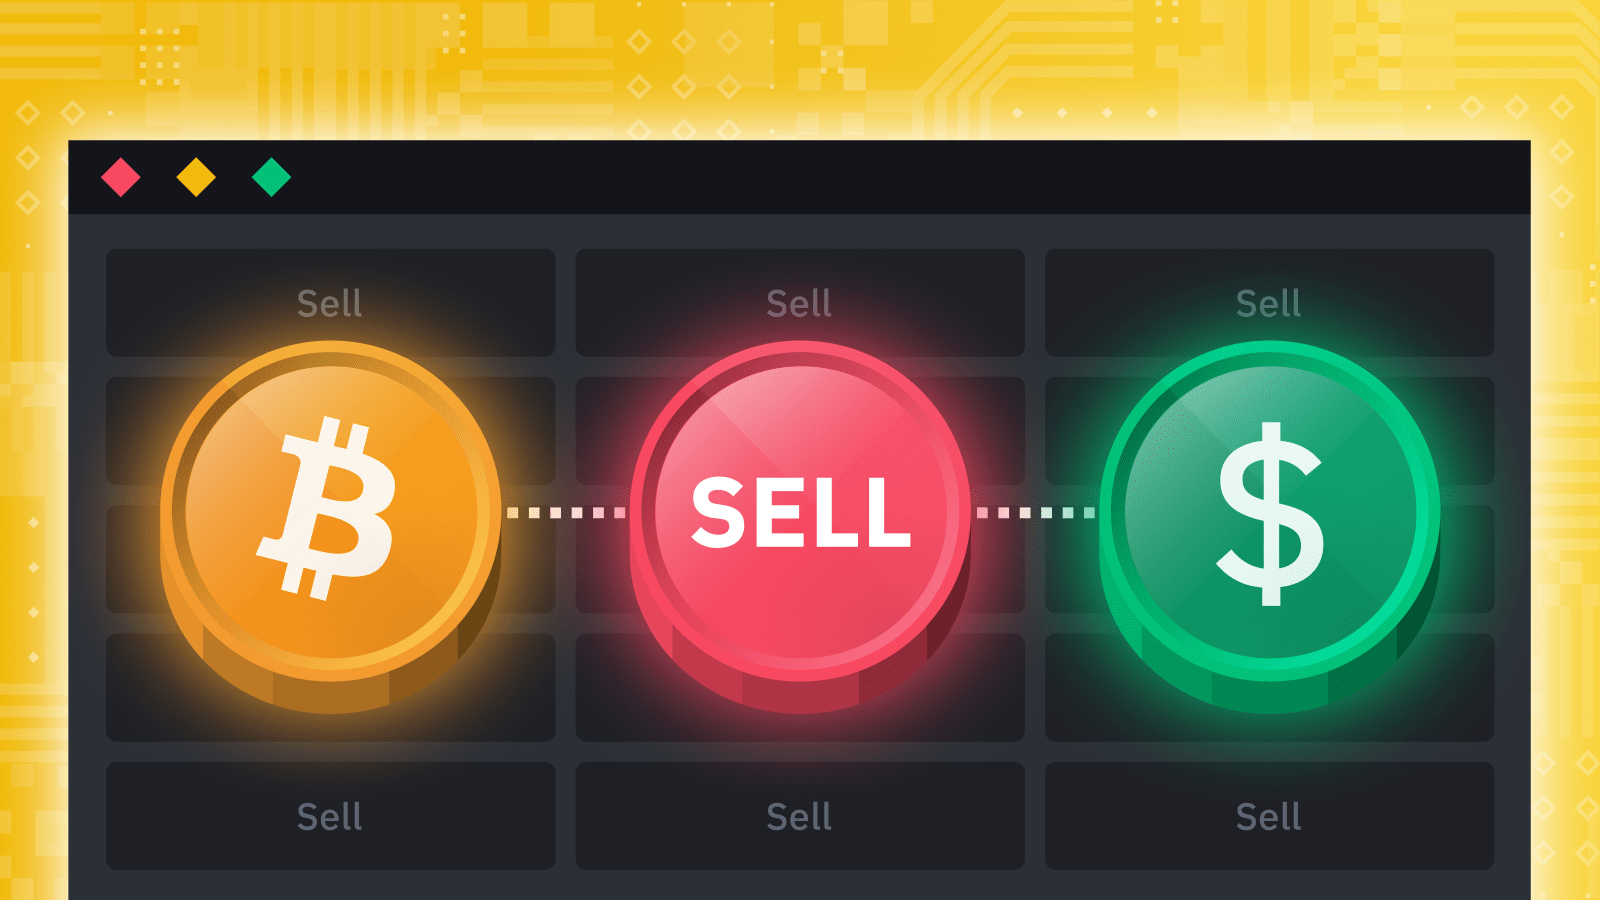 How to Sell Bitcoin on Binance: Step-by-Step Guide